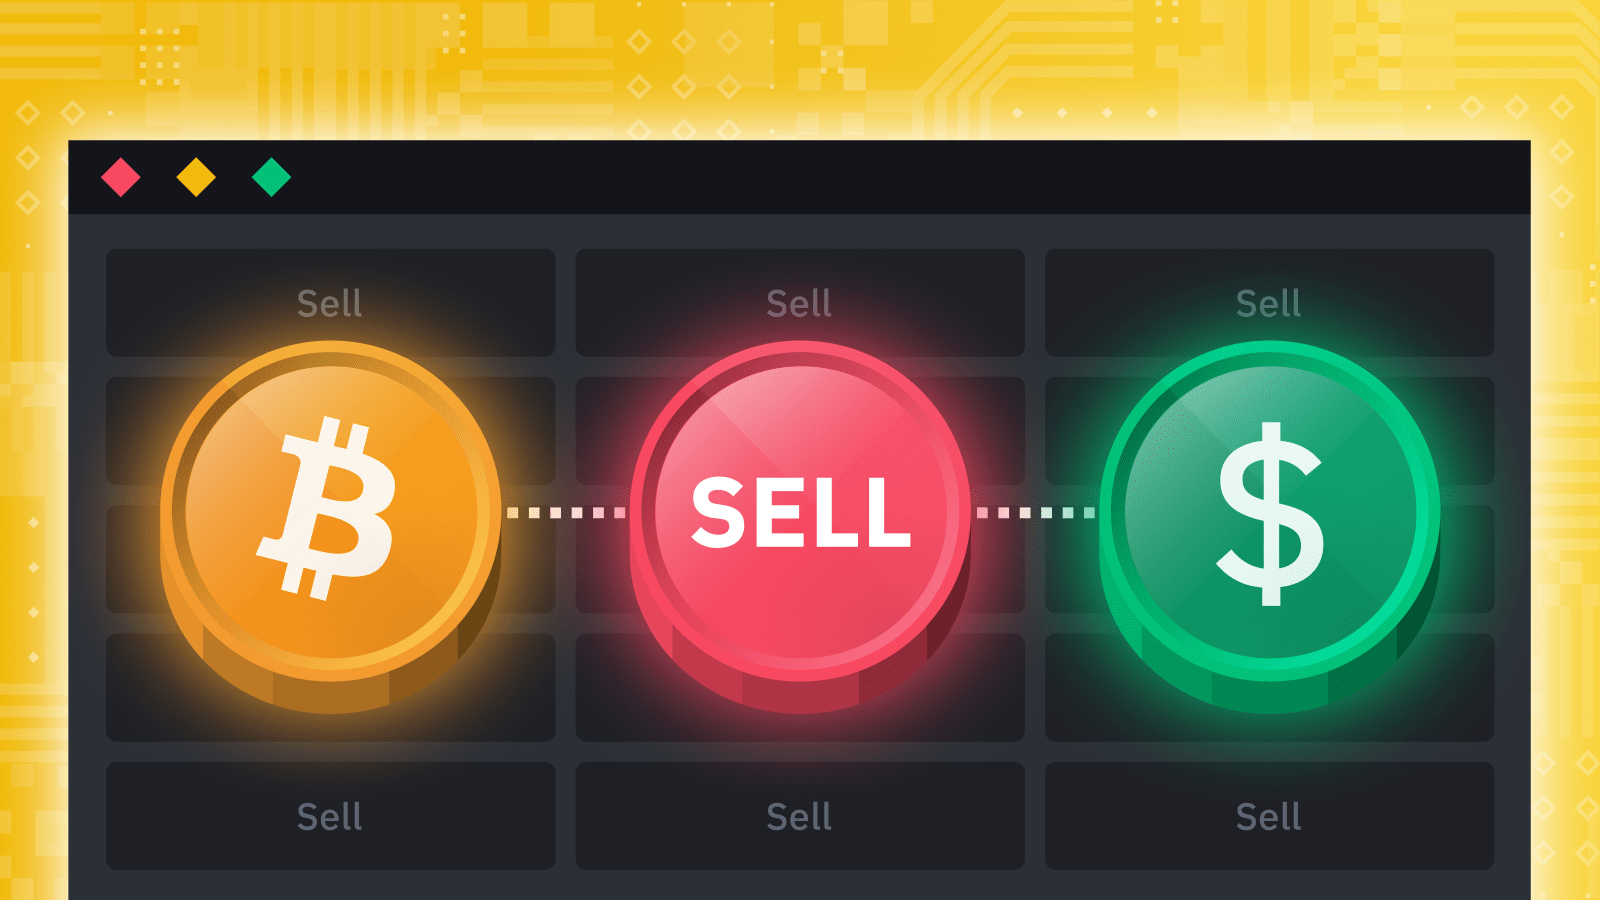 How to Sell Bitcoin on Binance: Step-by-Step Guide